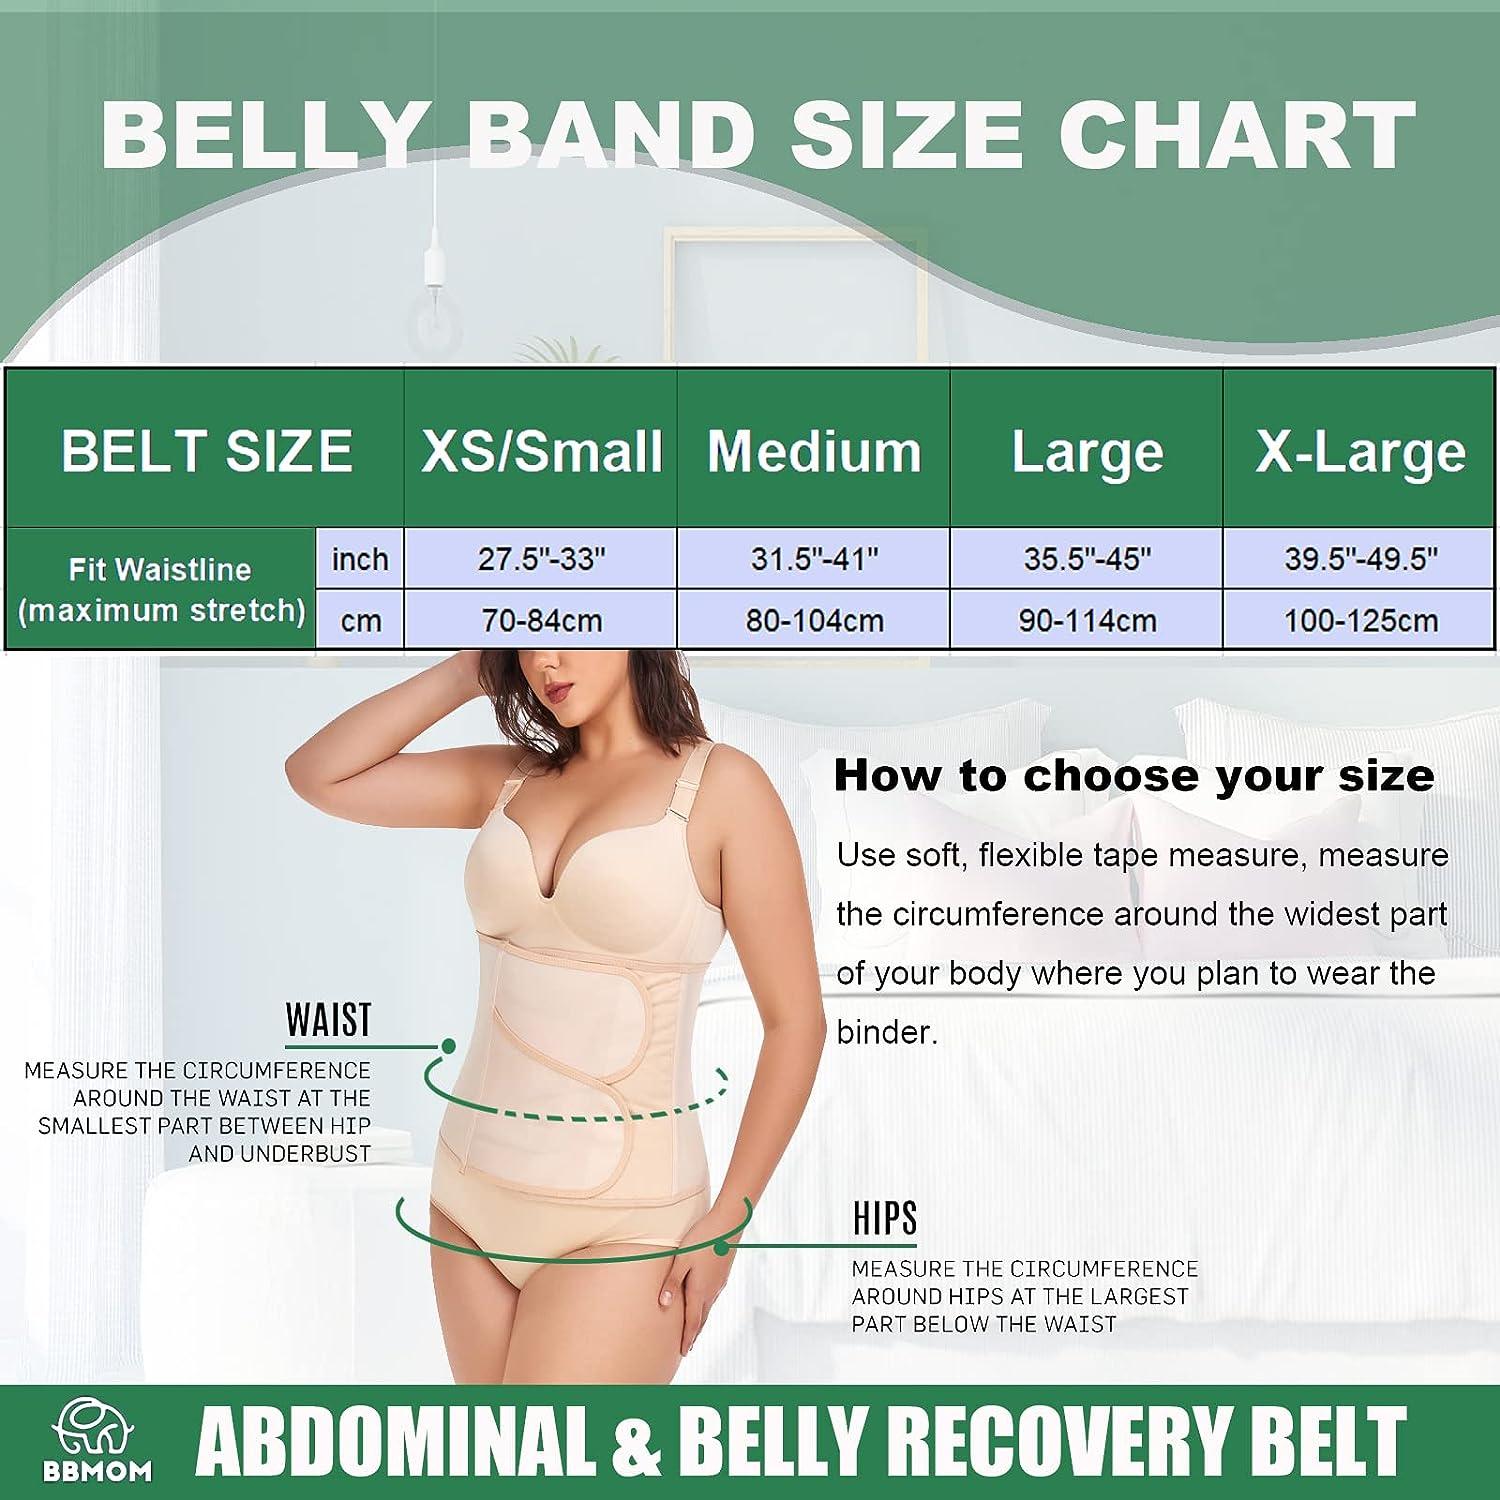 Postpartum Belly Band Abdominal Binder C-Section Recovery Belt Belly Wrap  Skin-Friendly Compression Wrap for Post Surgery Recovery (Large Z-Beige)  Large Z-beige